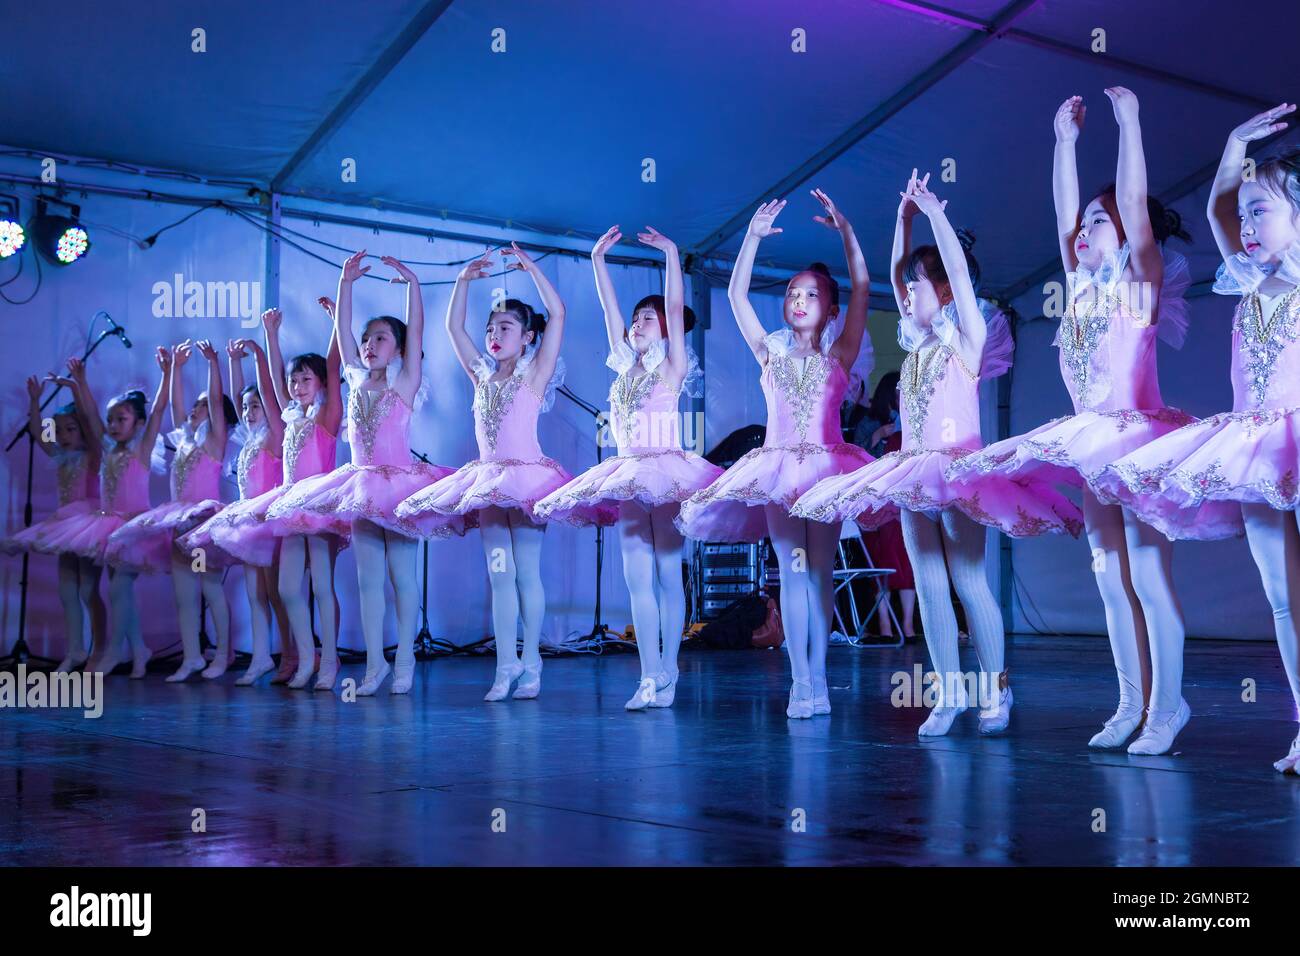 A row of young Asian girl ballerinas on stage in pink tutus, standing in the 'releve' position with arms raised Stock Photo